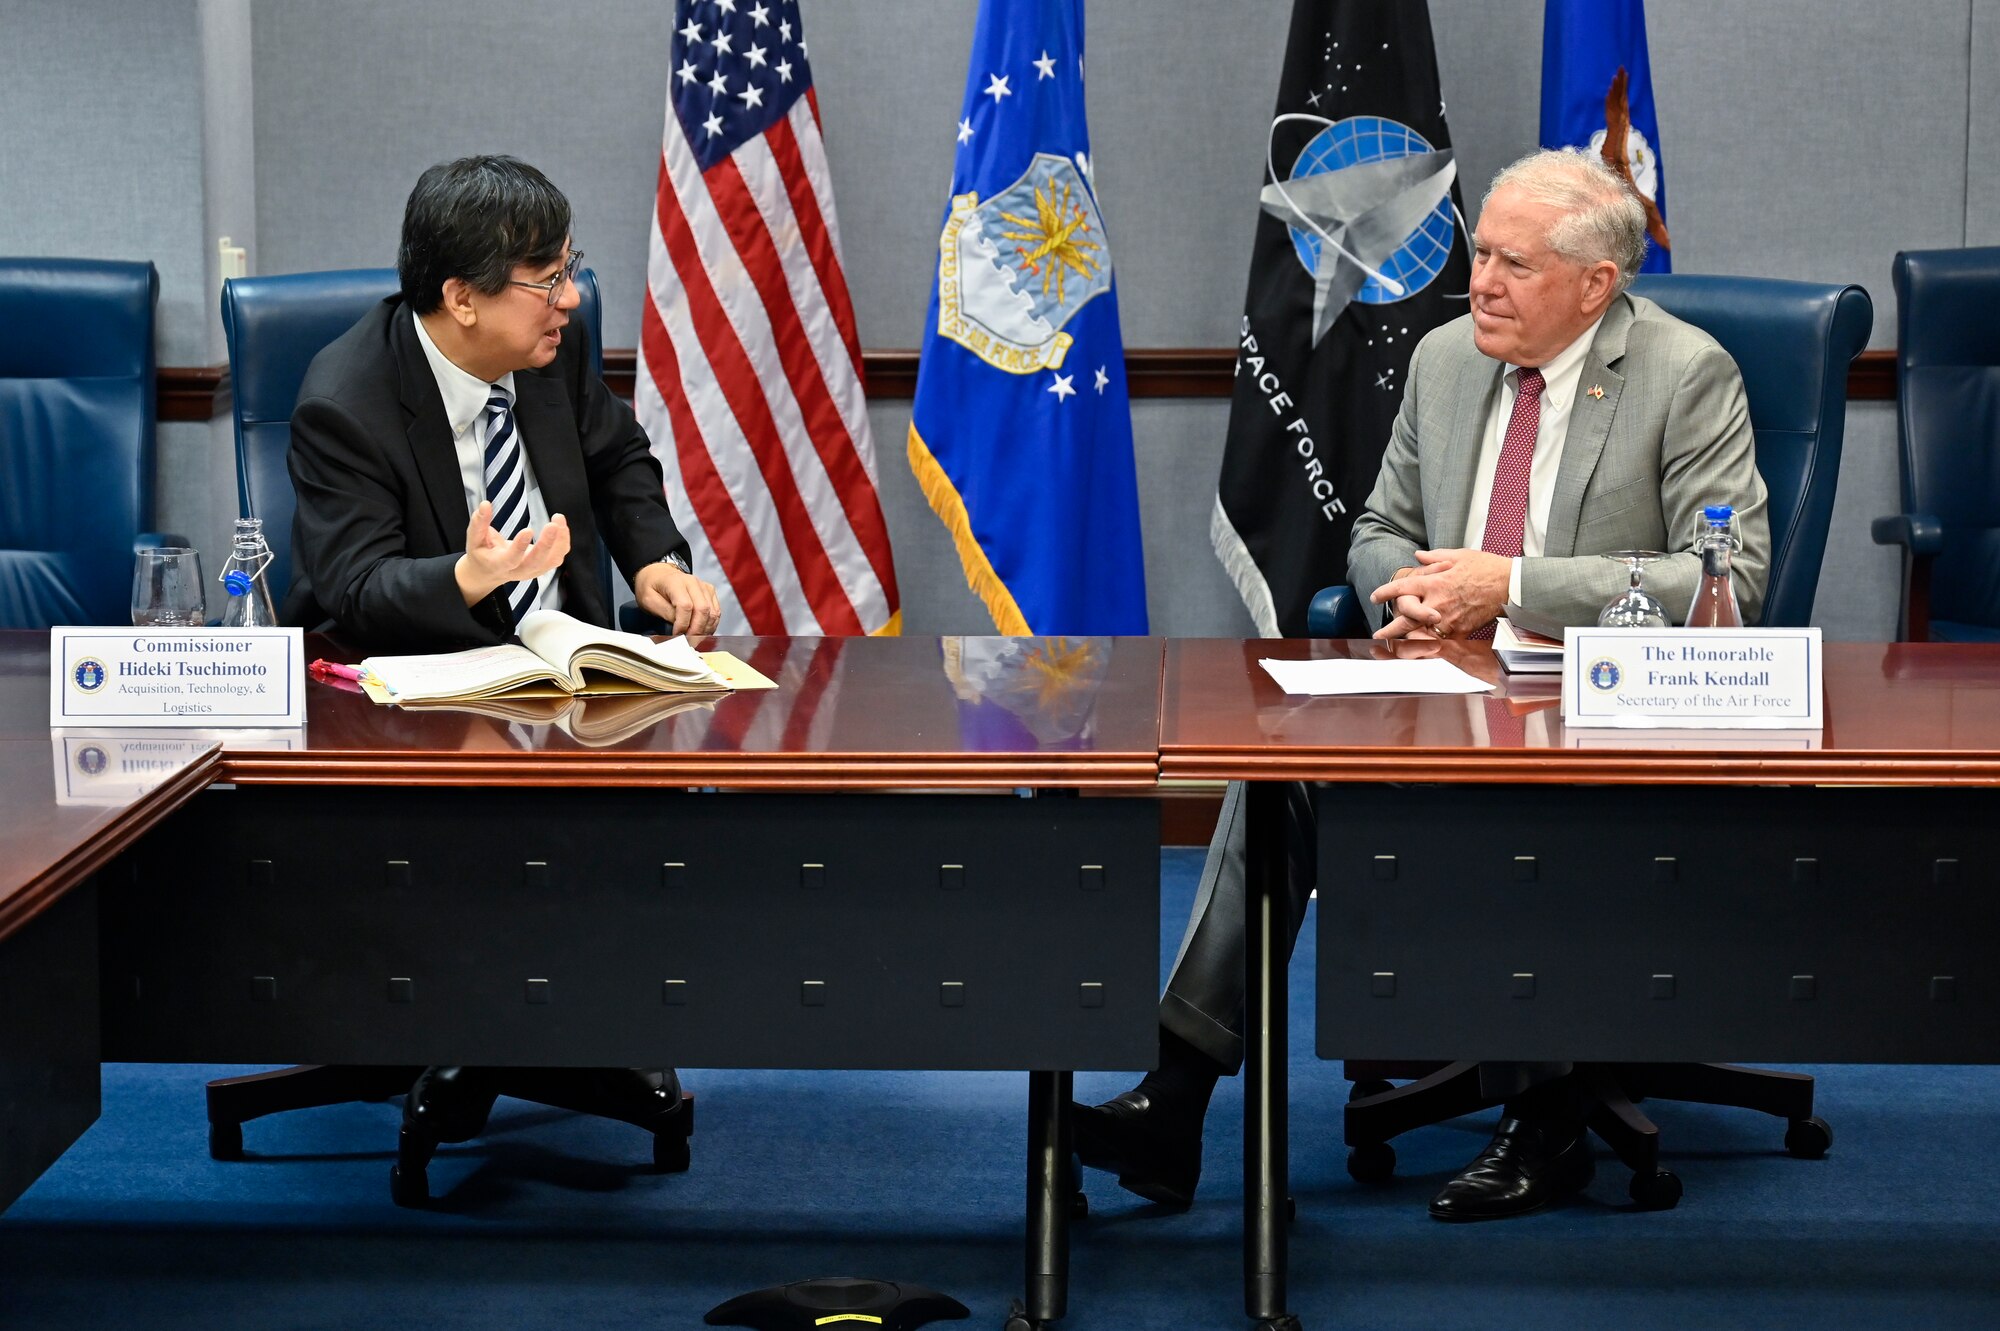 Hideki Tsuchimoto, commissioner of the Acquisition, Technology and Logistics Agency, Japanese Ministry of Defense, speaks with Secretary of the Air Force Frank Kendall during a meeting.